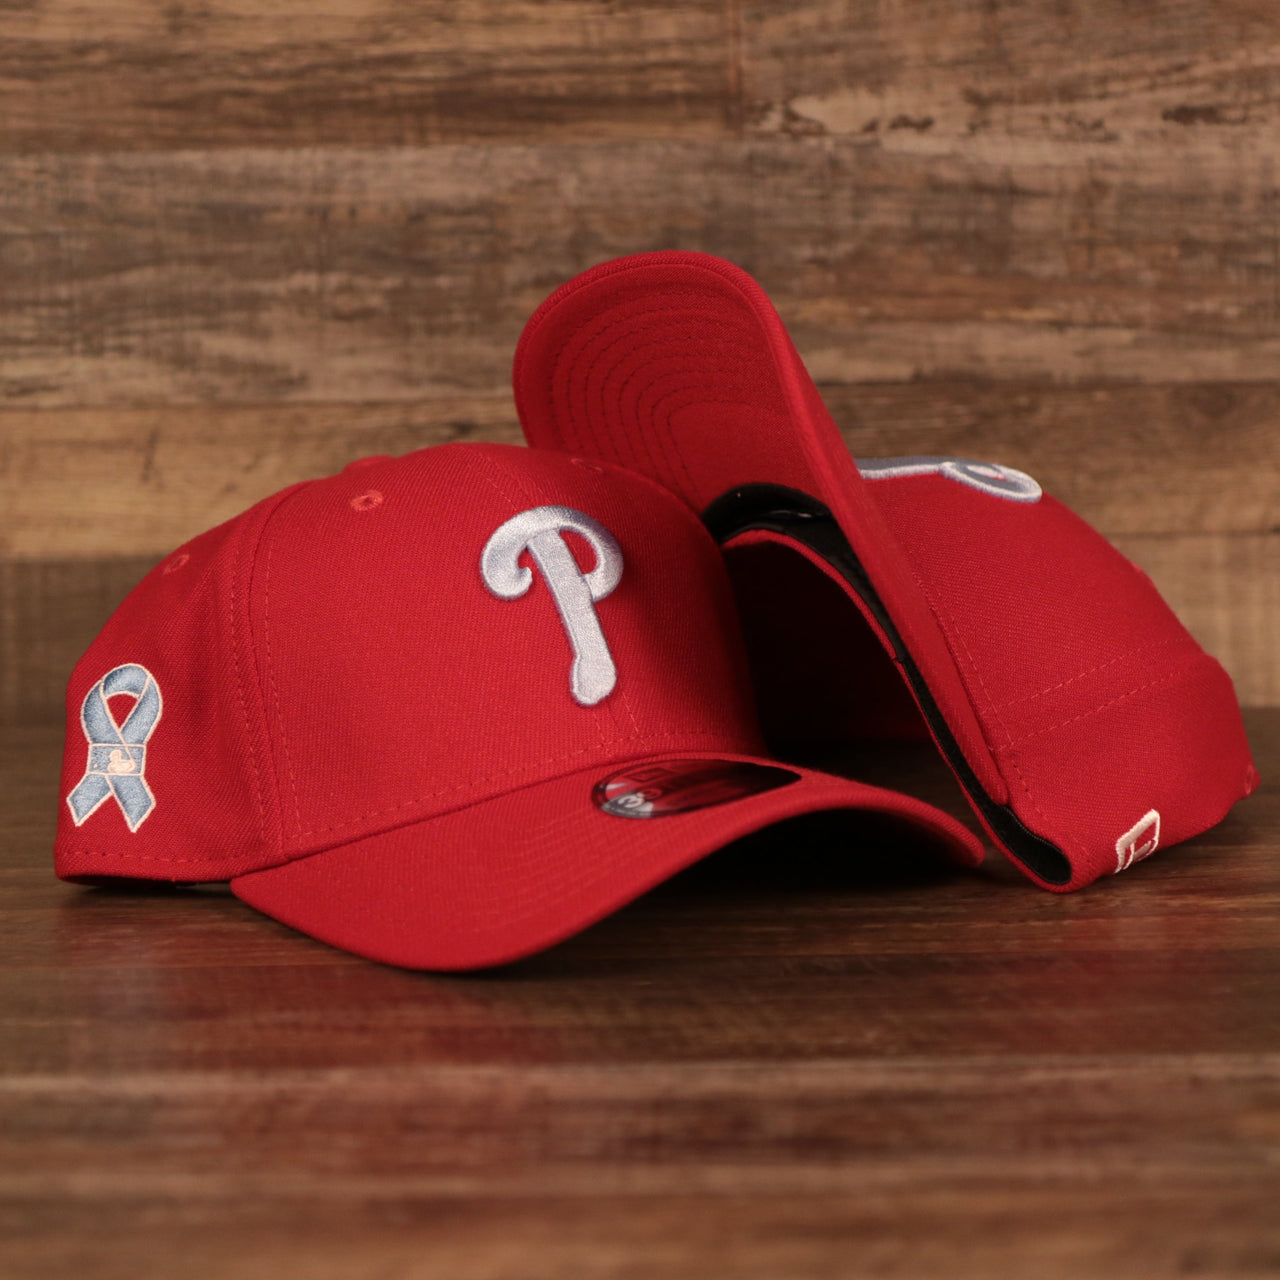 The Philadelphia Phillies red 39thirty flexfit 2021 MLB fathers day hat by New Era.